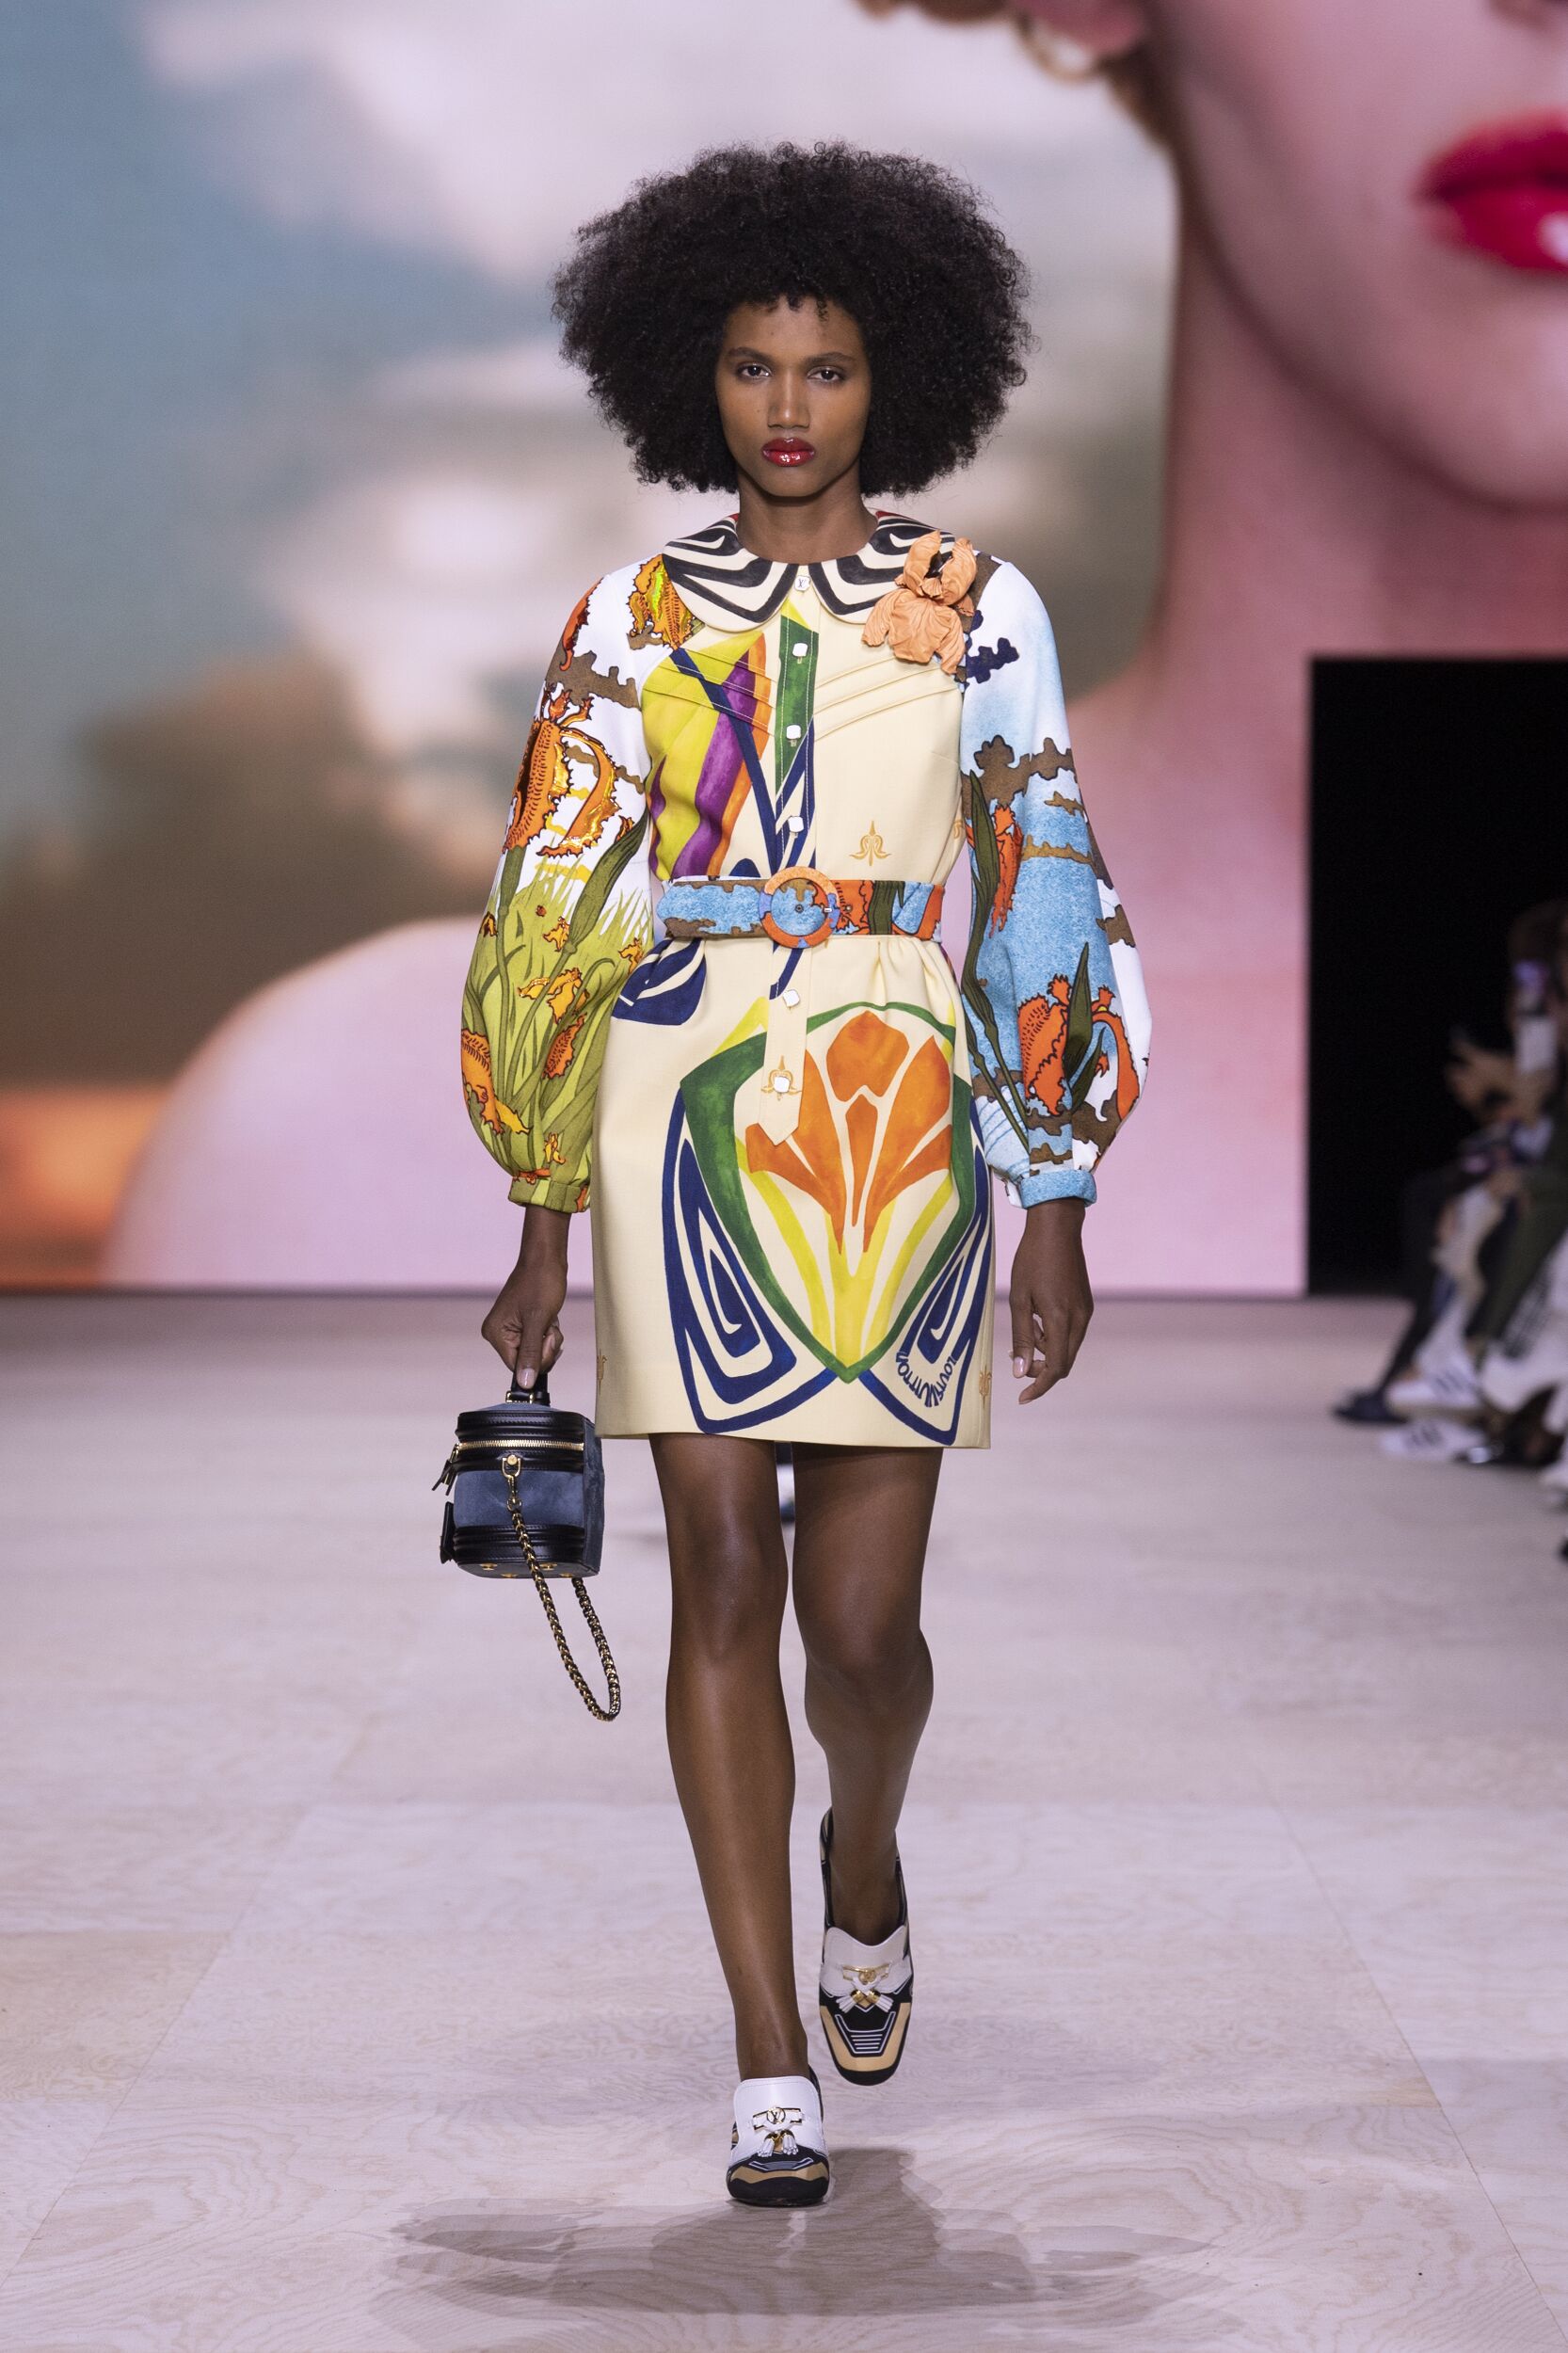 Spring/Summer 2020: Feminine Prints With Louis Vuitton, Chanel